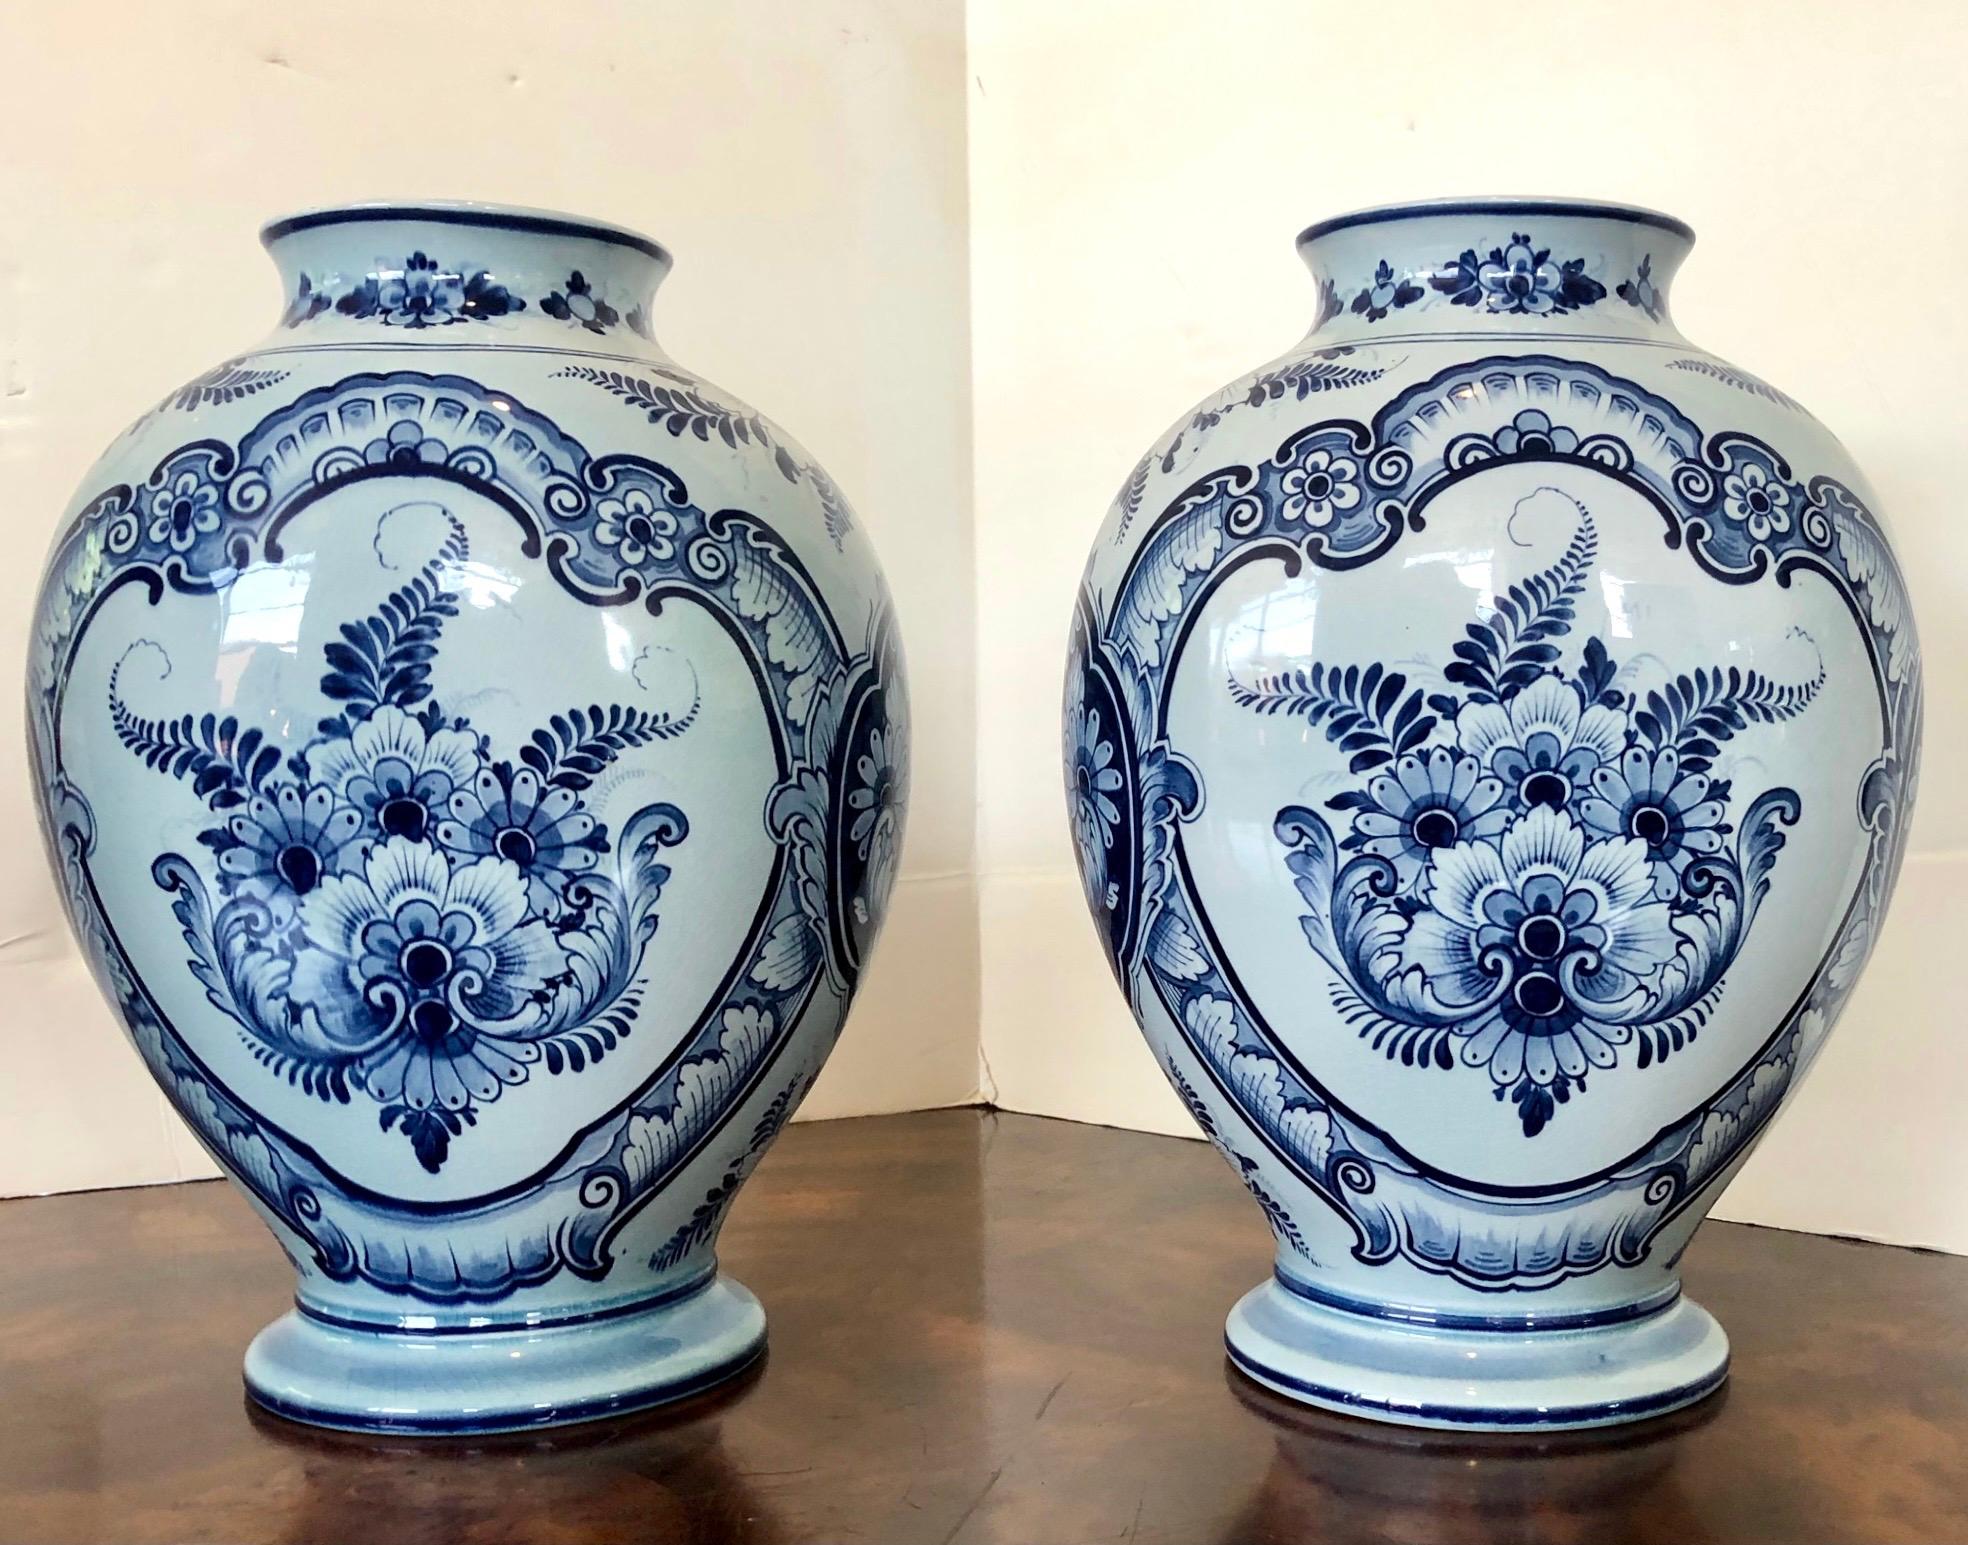 Rare pair of large antique Delft Royal Bonn German pottery faience vases circa 1890-1920. Features hand painted portraits of women on the front of urns. Signed on undersides. An unexpected surprise given the size!